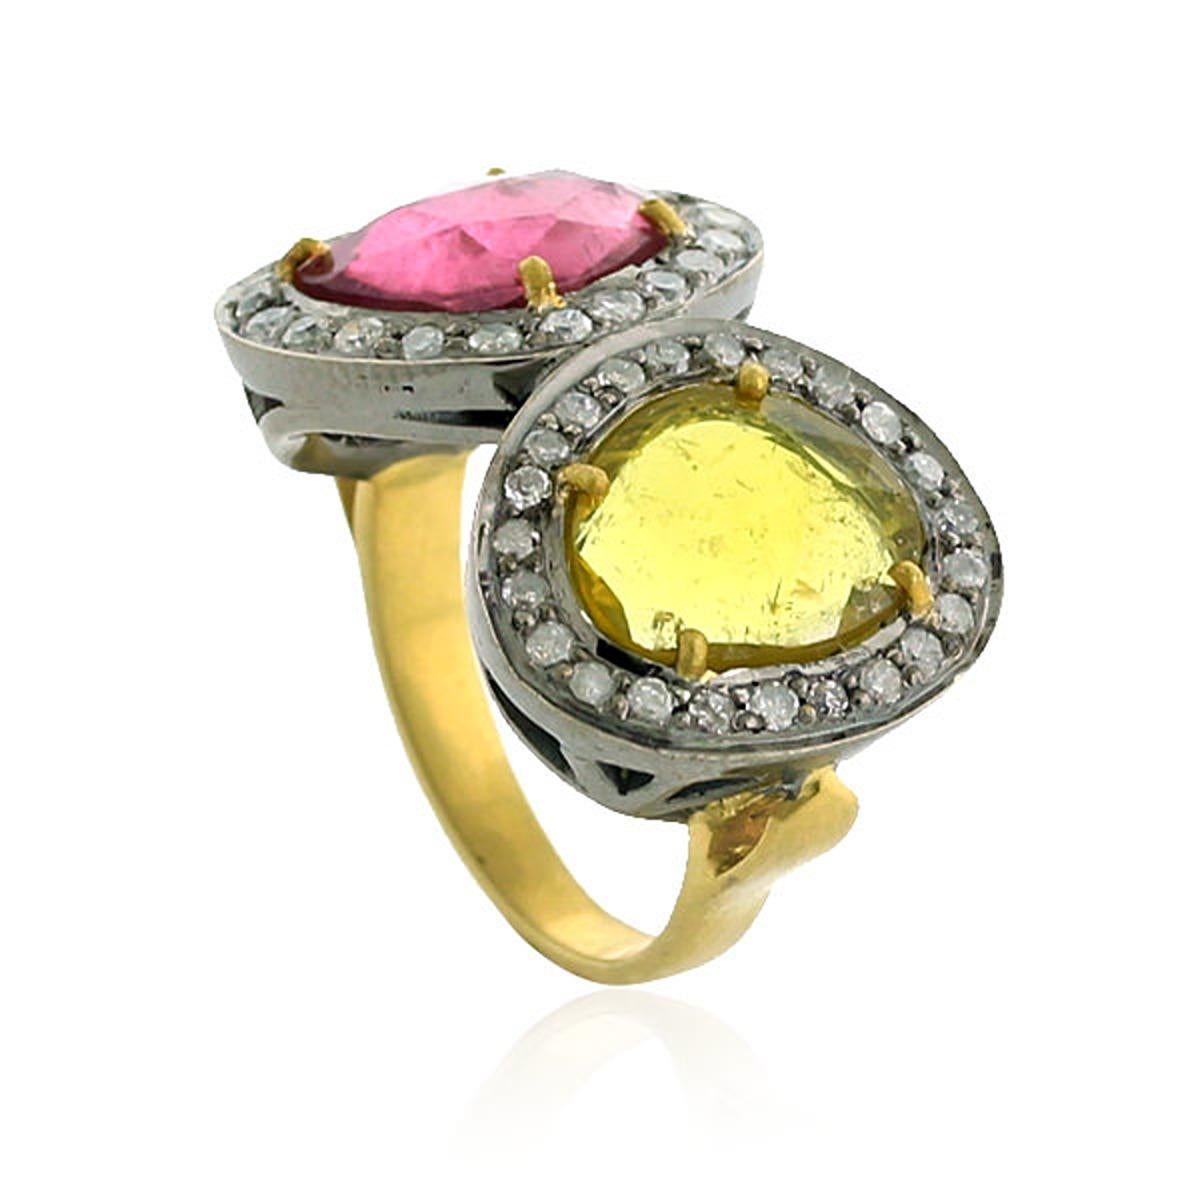 Mixed Cut Multicolored Tourmaline Ring With Diamonds Made In 18k Gold & Silver For Sale